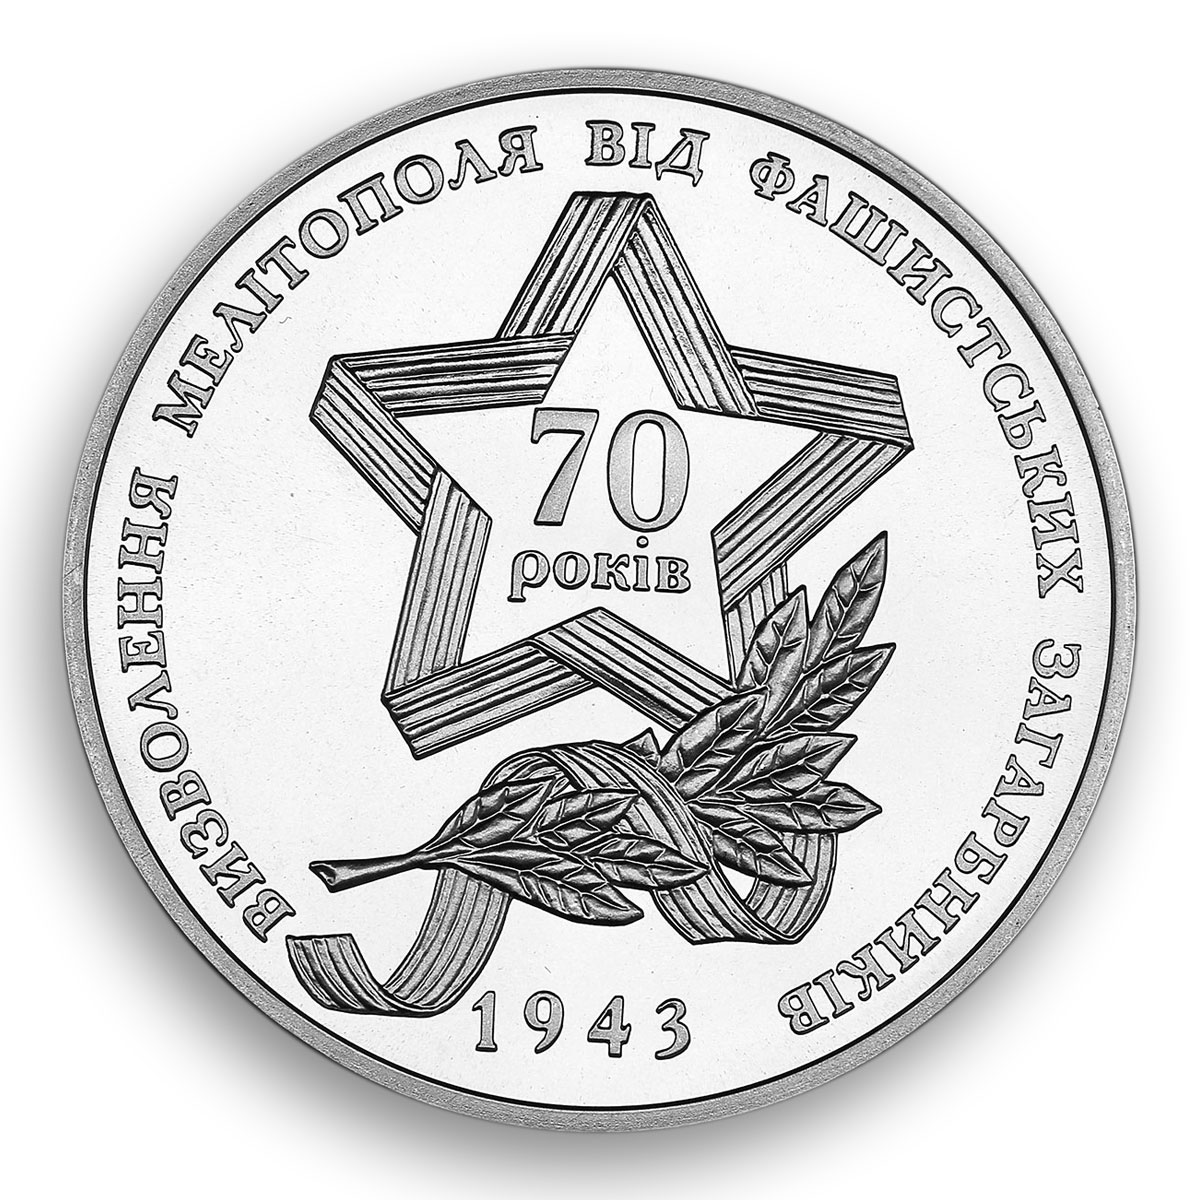 Ukraine 5 hryvnia 70 years Liberation Melitopol from fascists nickel coin 2013